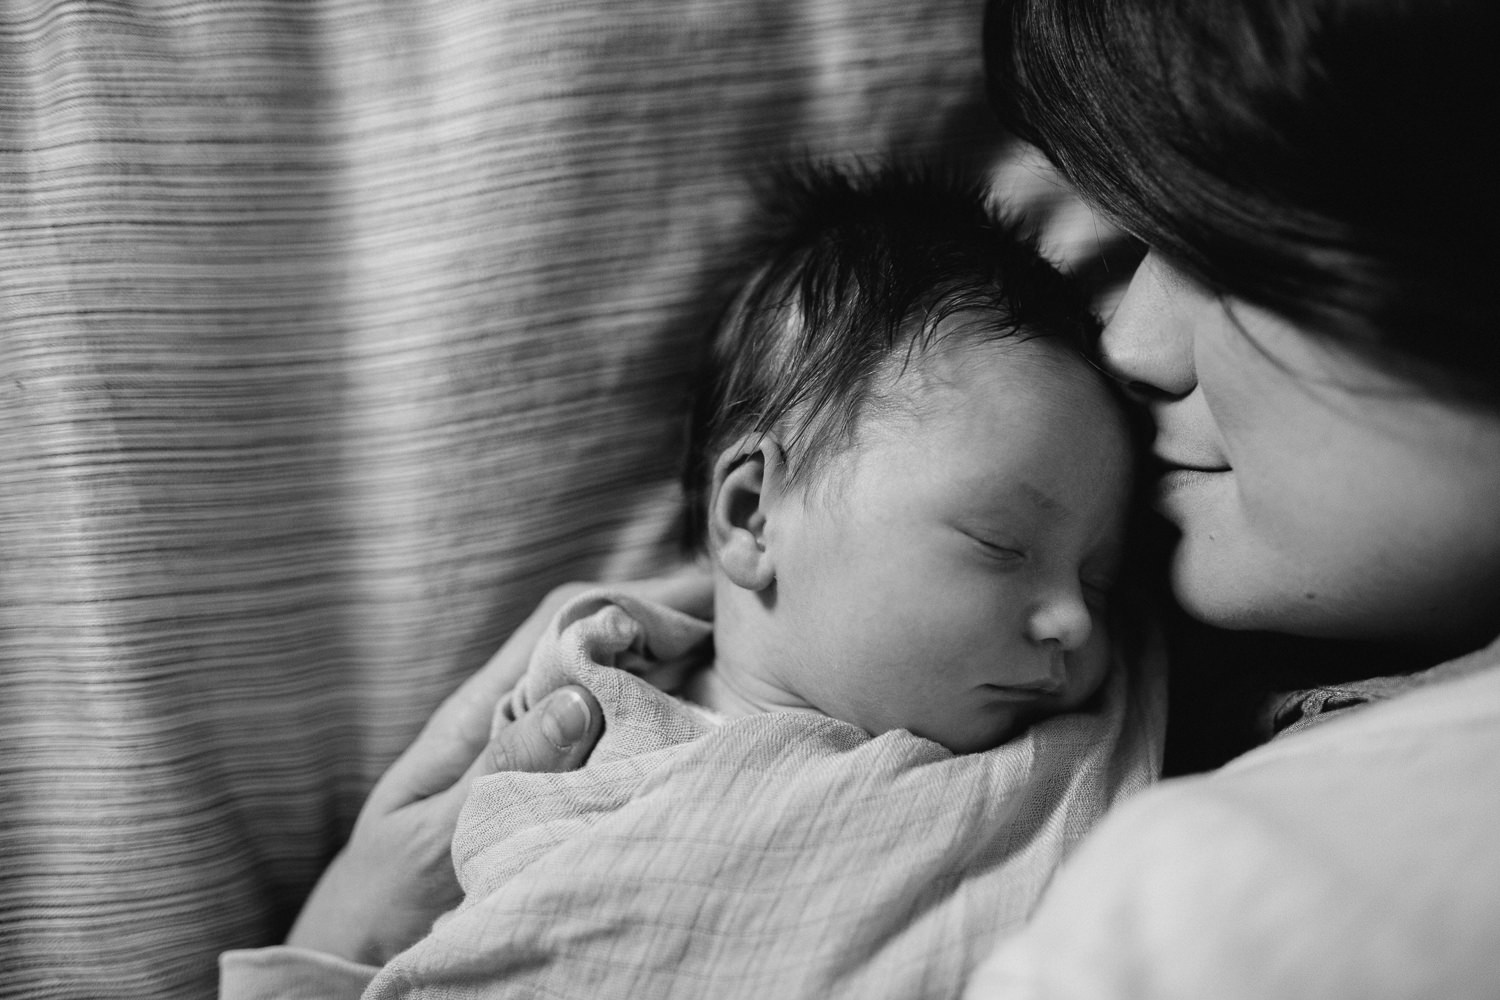 new mom snuggled face to face with 2 week old baby daughter - Barrie lifestyle photography session